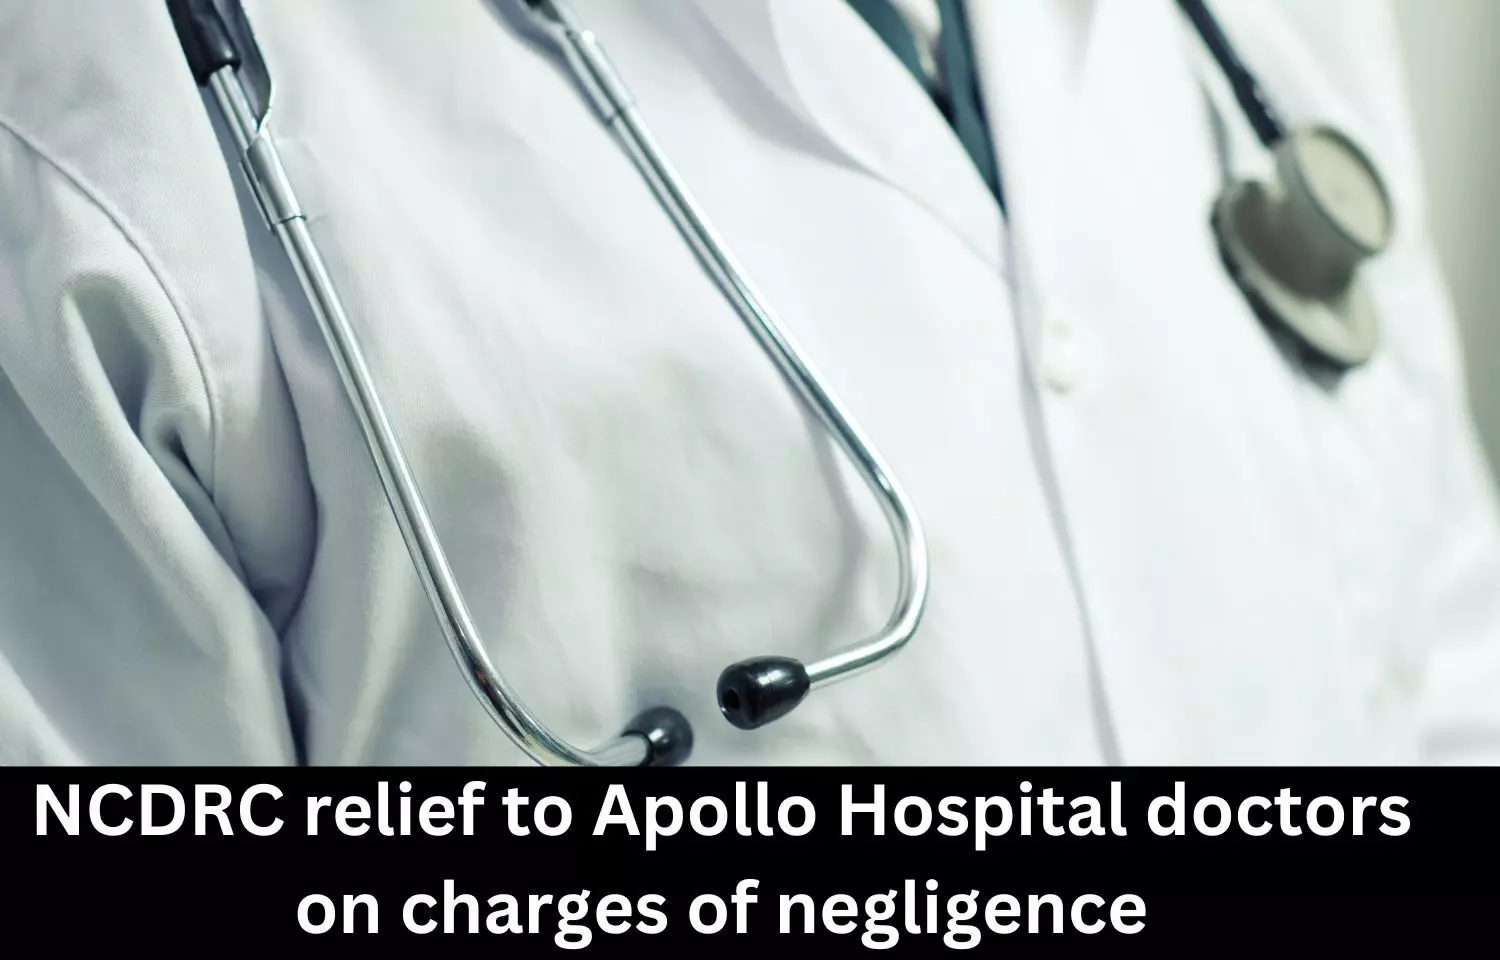 NCDRC exonerates 2 Apollo Hospital doctors from medical negligence charges